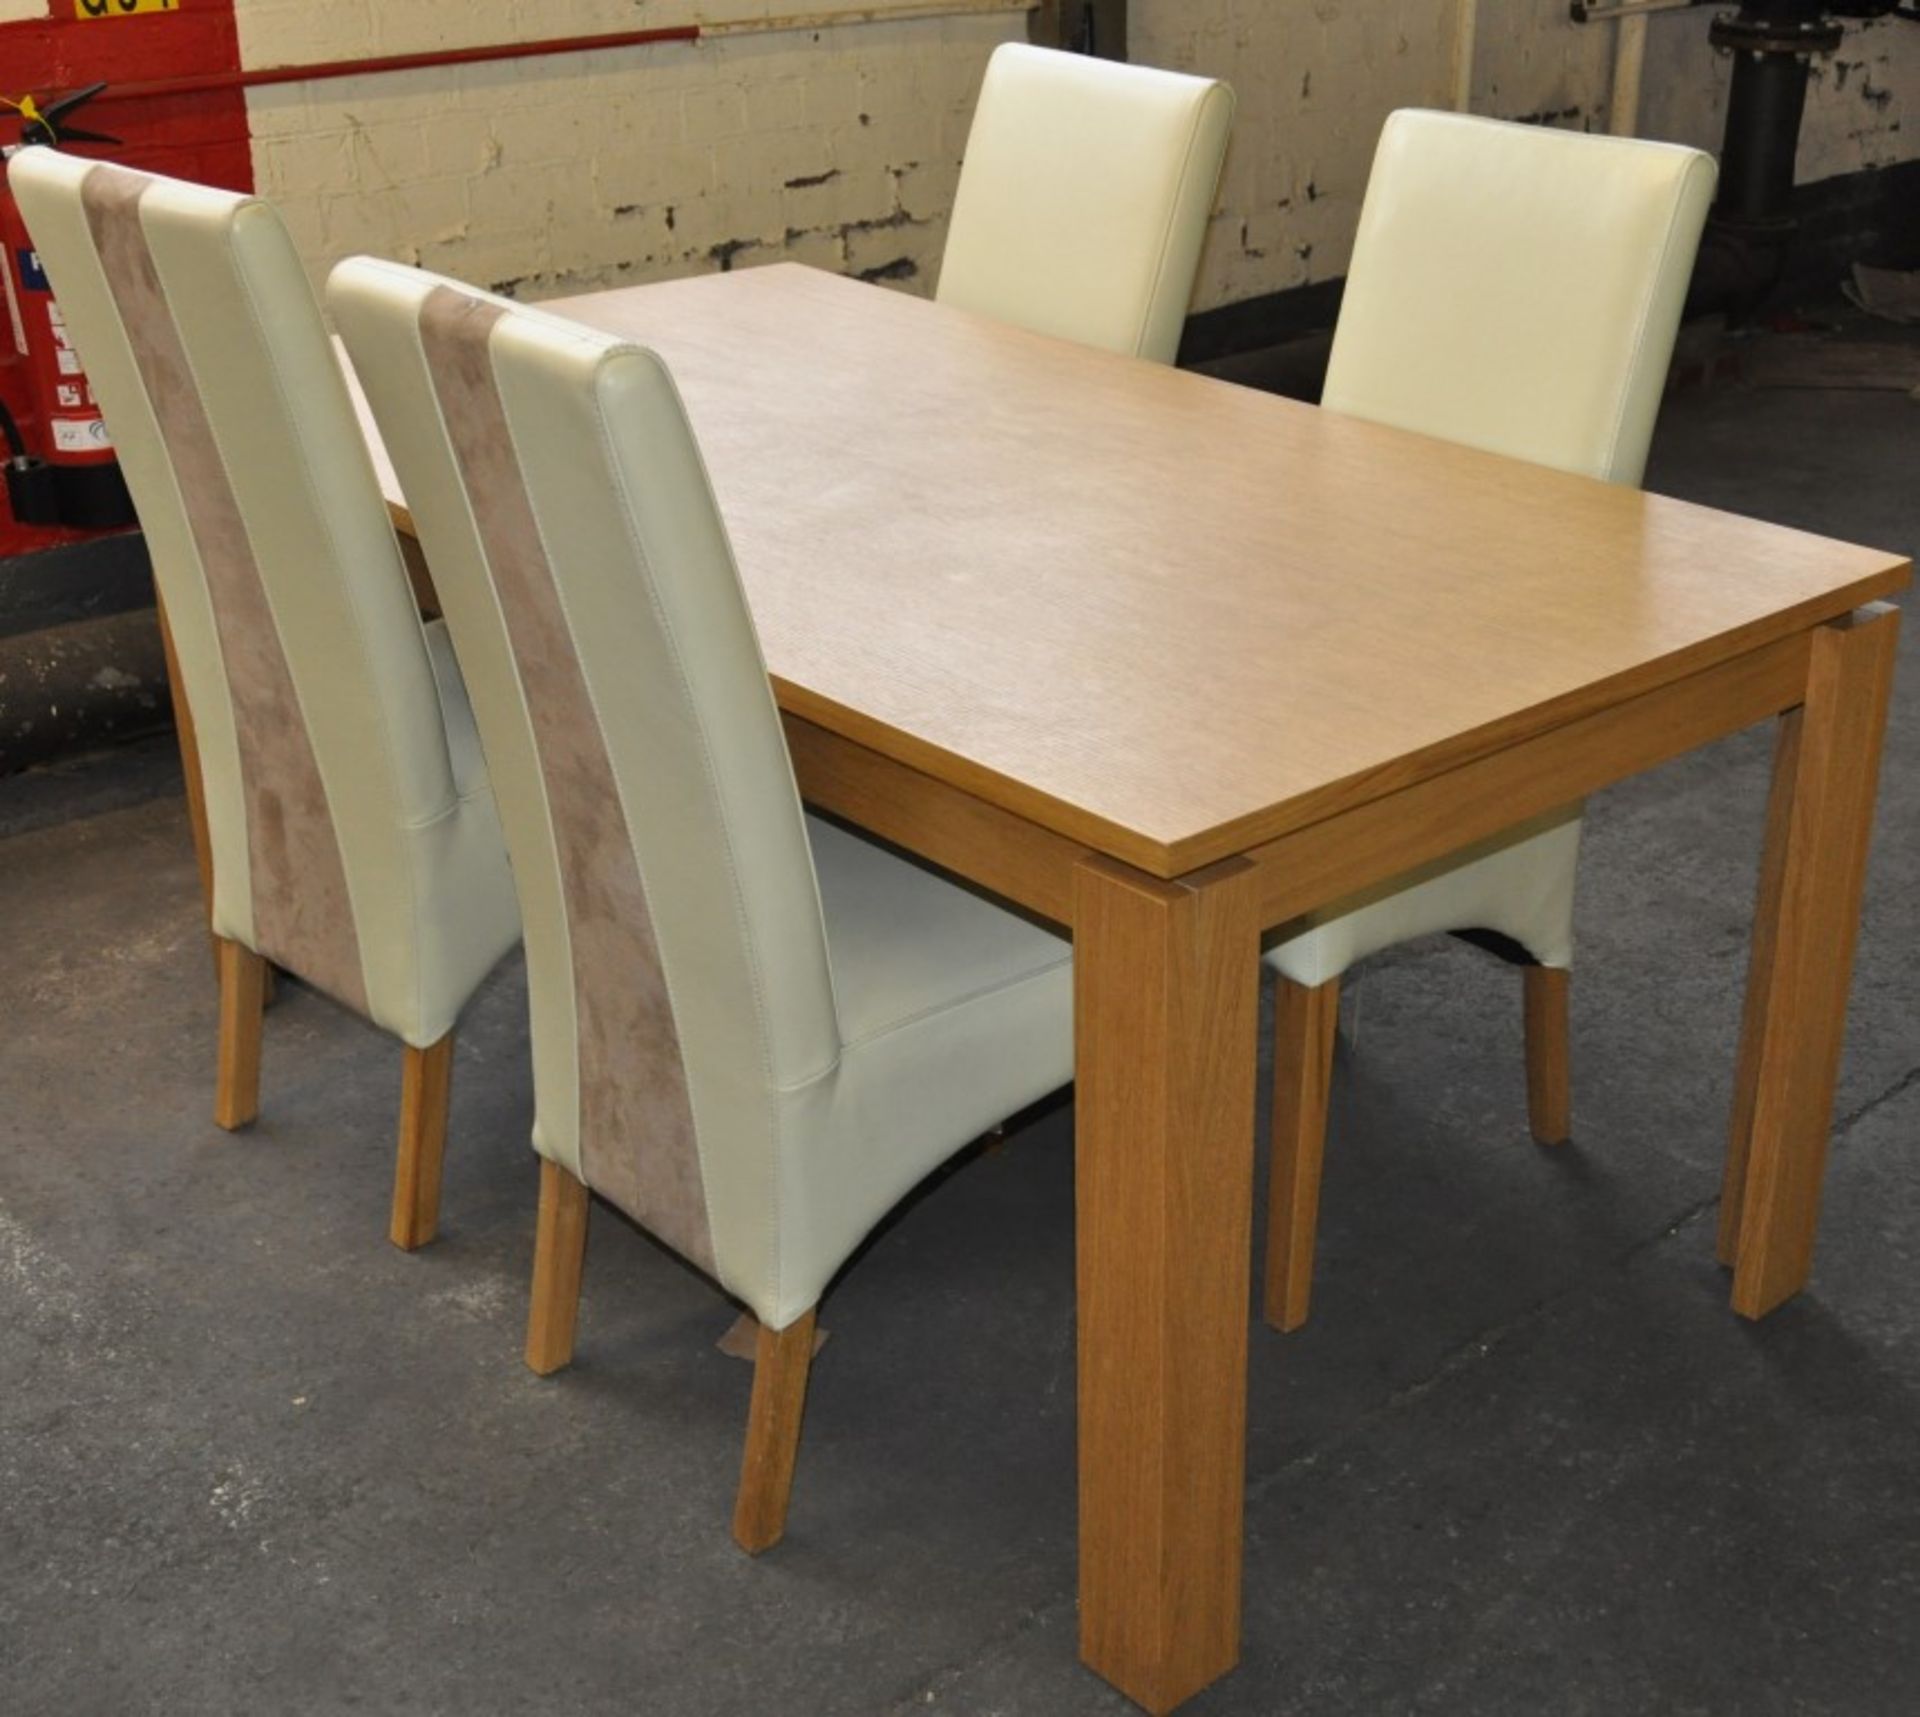 1 x Natural Oak Fixed Top Dining Table Set with 4 Luxurious Matching Chairs – Good Condition – Ex - Image 3 of 11